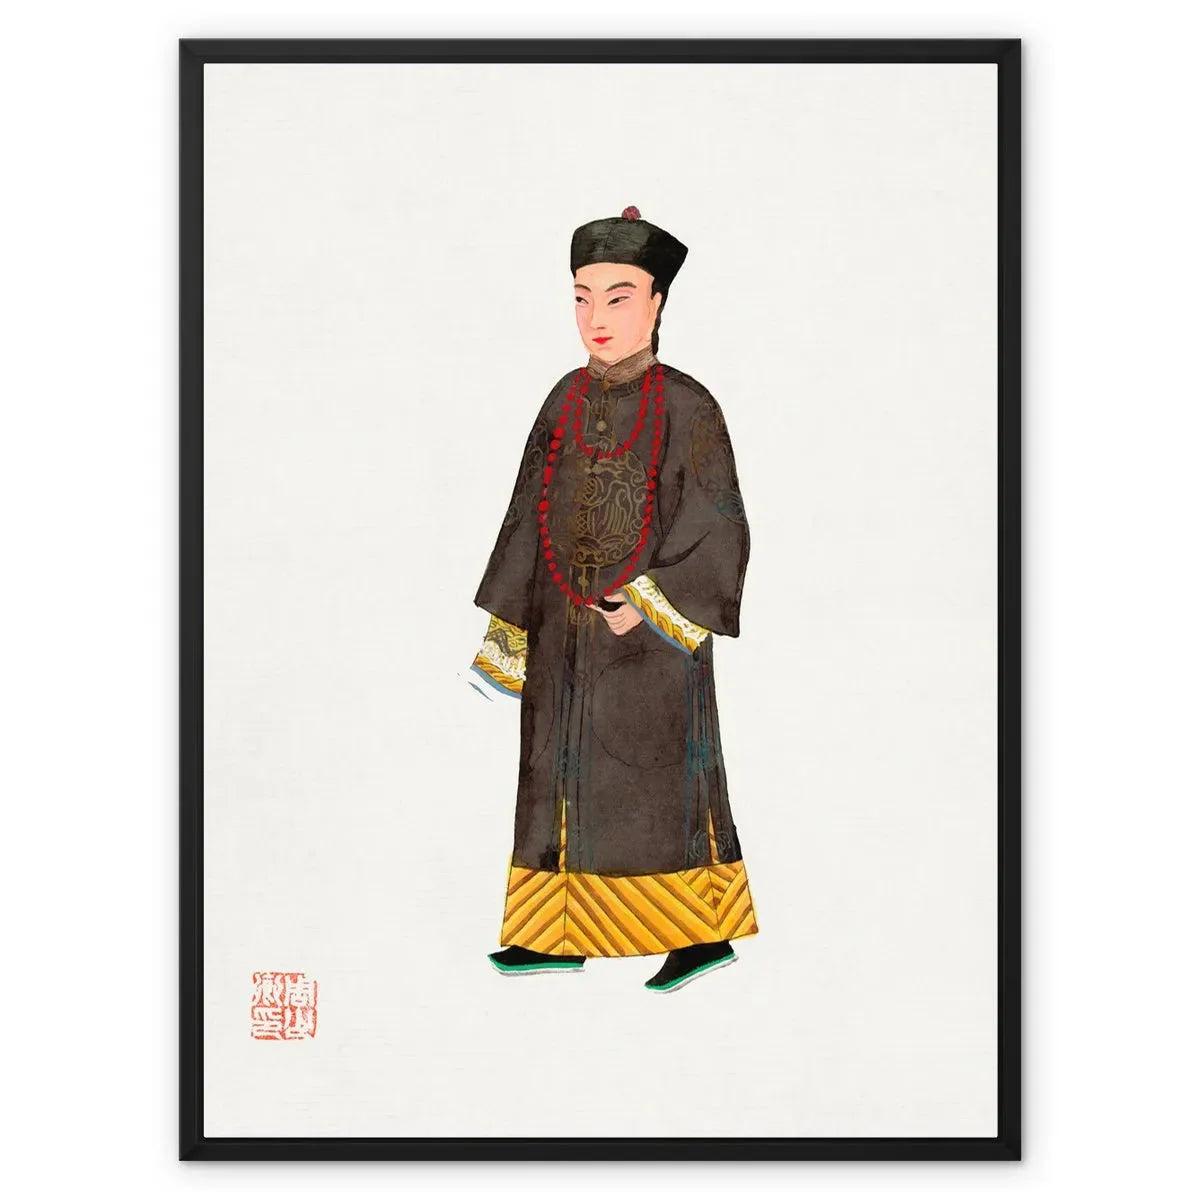 Chinese Emperor’s Courtier Framed Canvas - 24’x32’ / Black Frame / White Wrap - Posters Prints & Visual Artwork